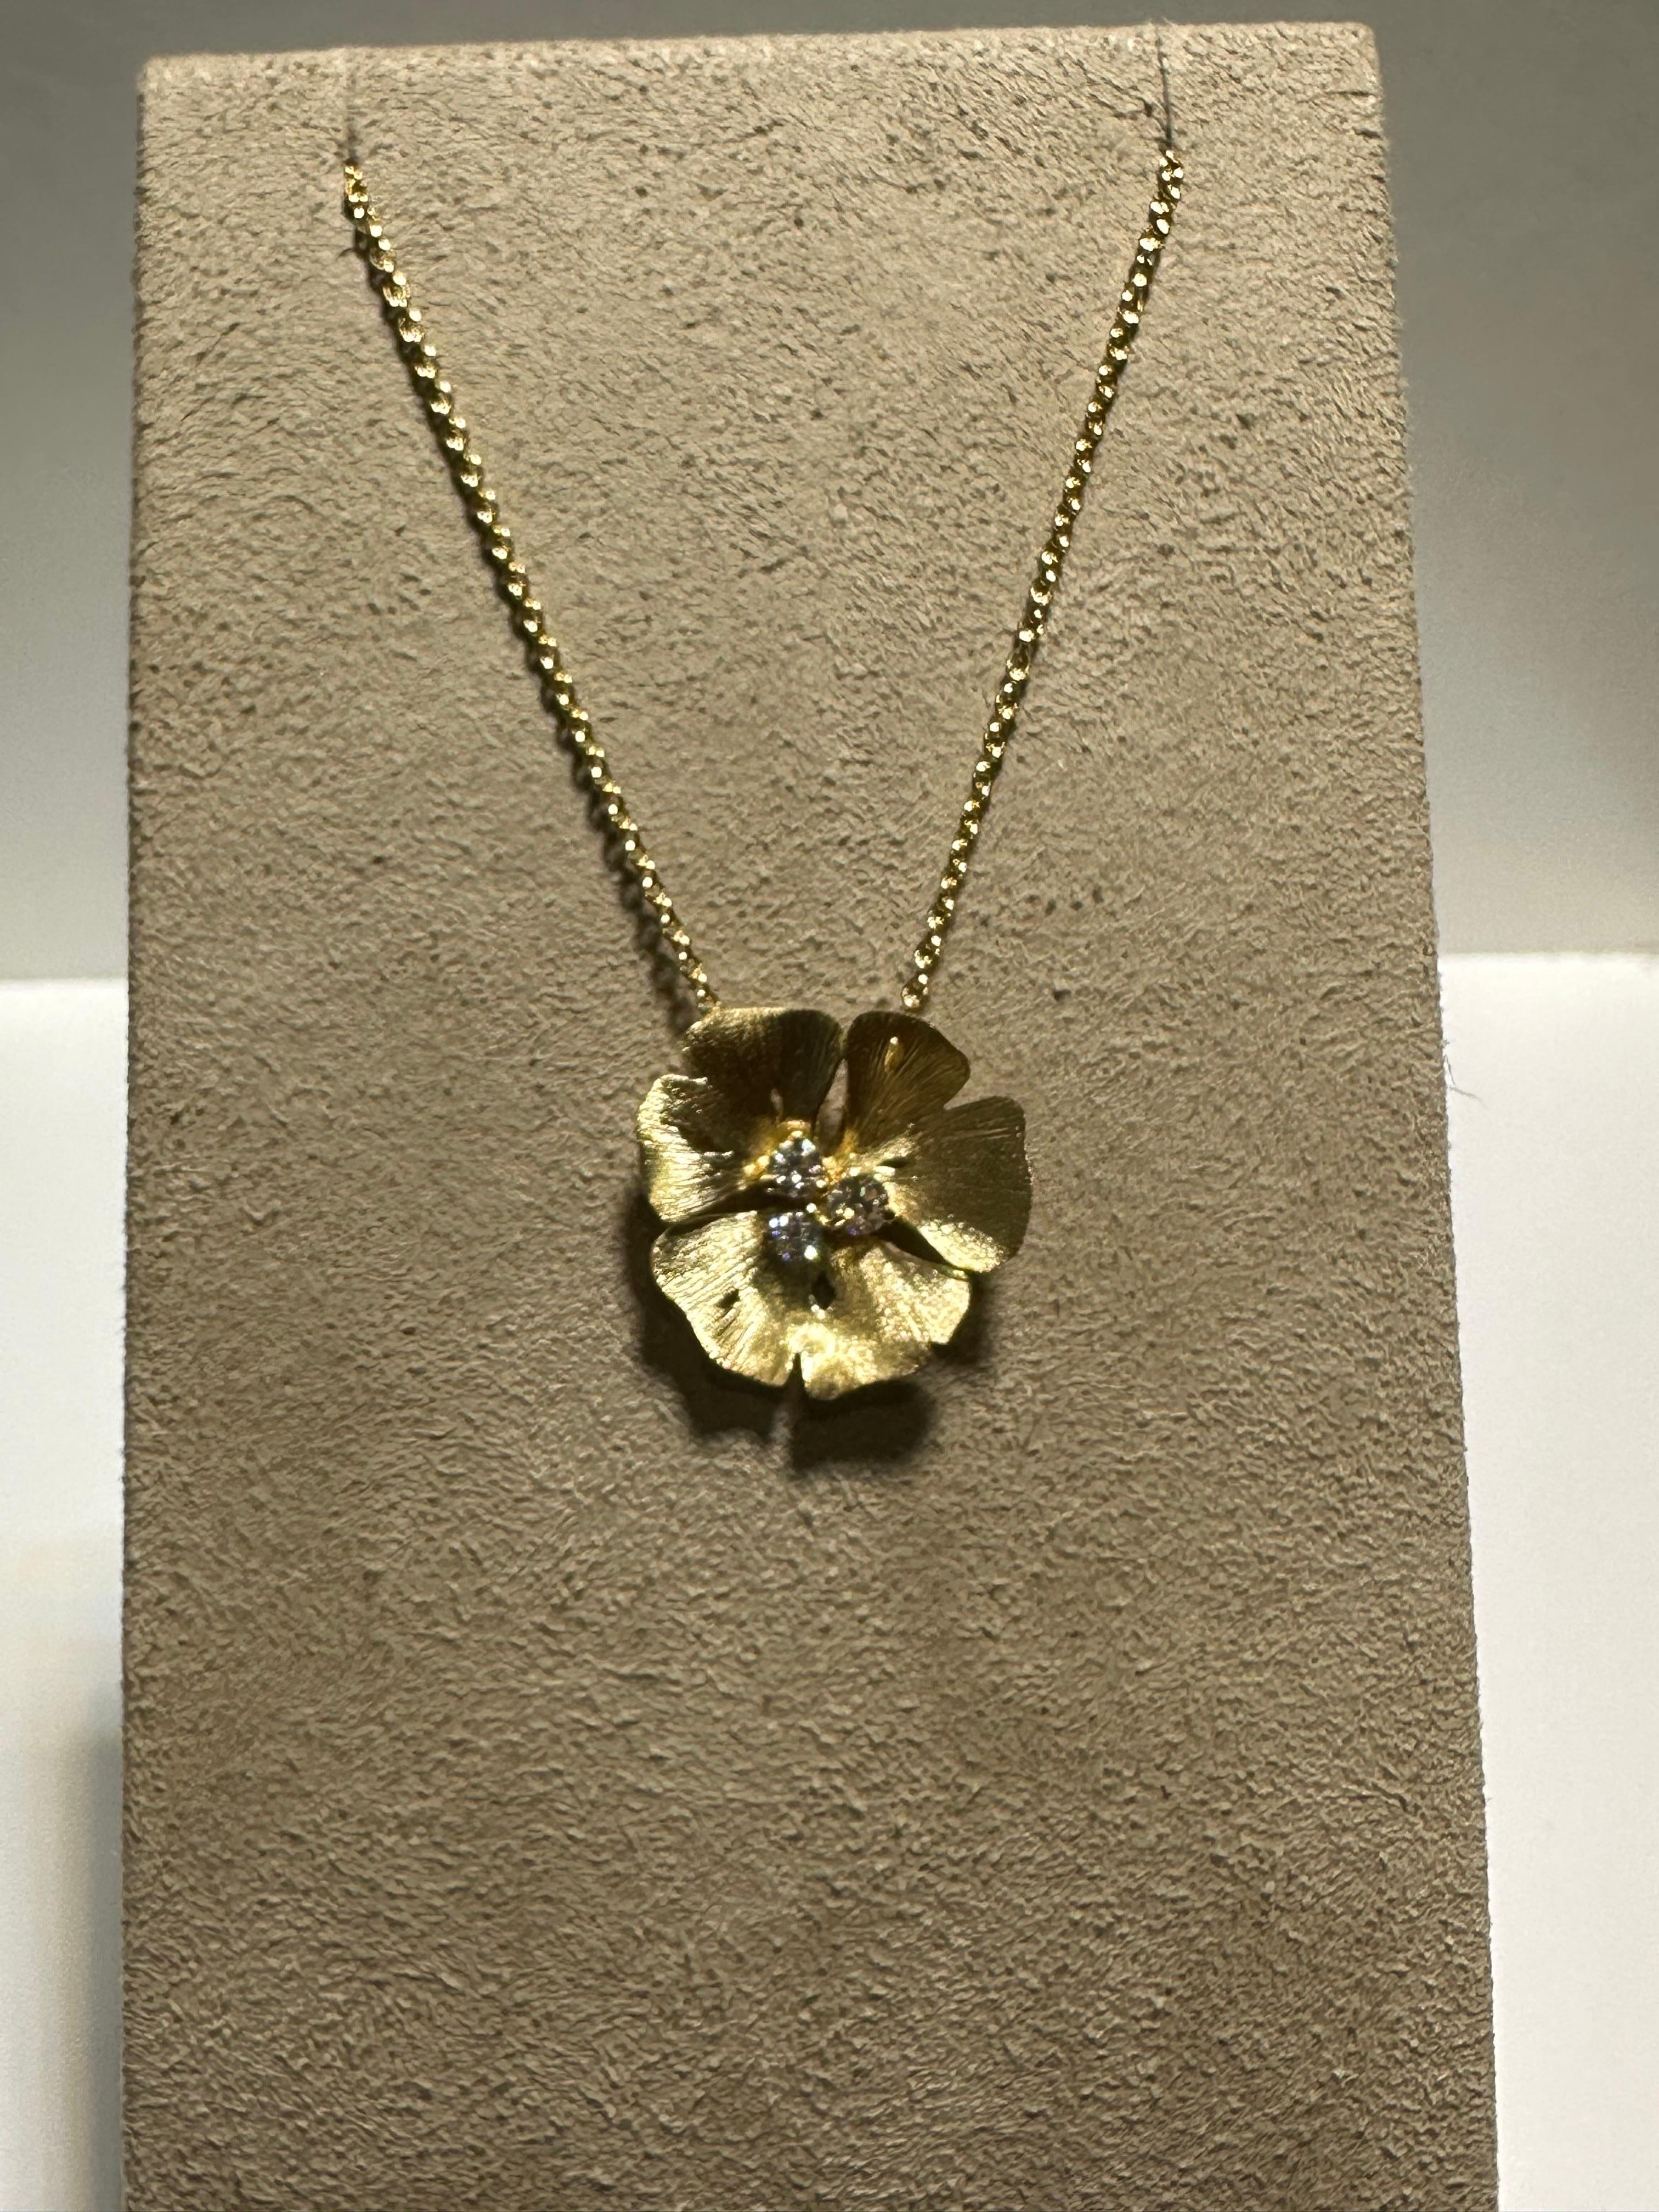 Brand new necklace made the French jewelry house Vever. The necklace is made of 18 kt yellowgold and has 3 labgrown diamonds (0.23 ct). Necklace 45 cm with two extra adjustments on 42 and 40 cm.

The starts in 1821 in Metz, France, when Pierre-Paul